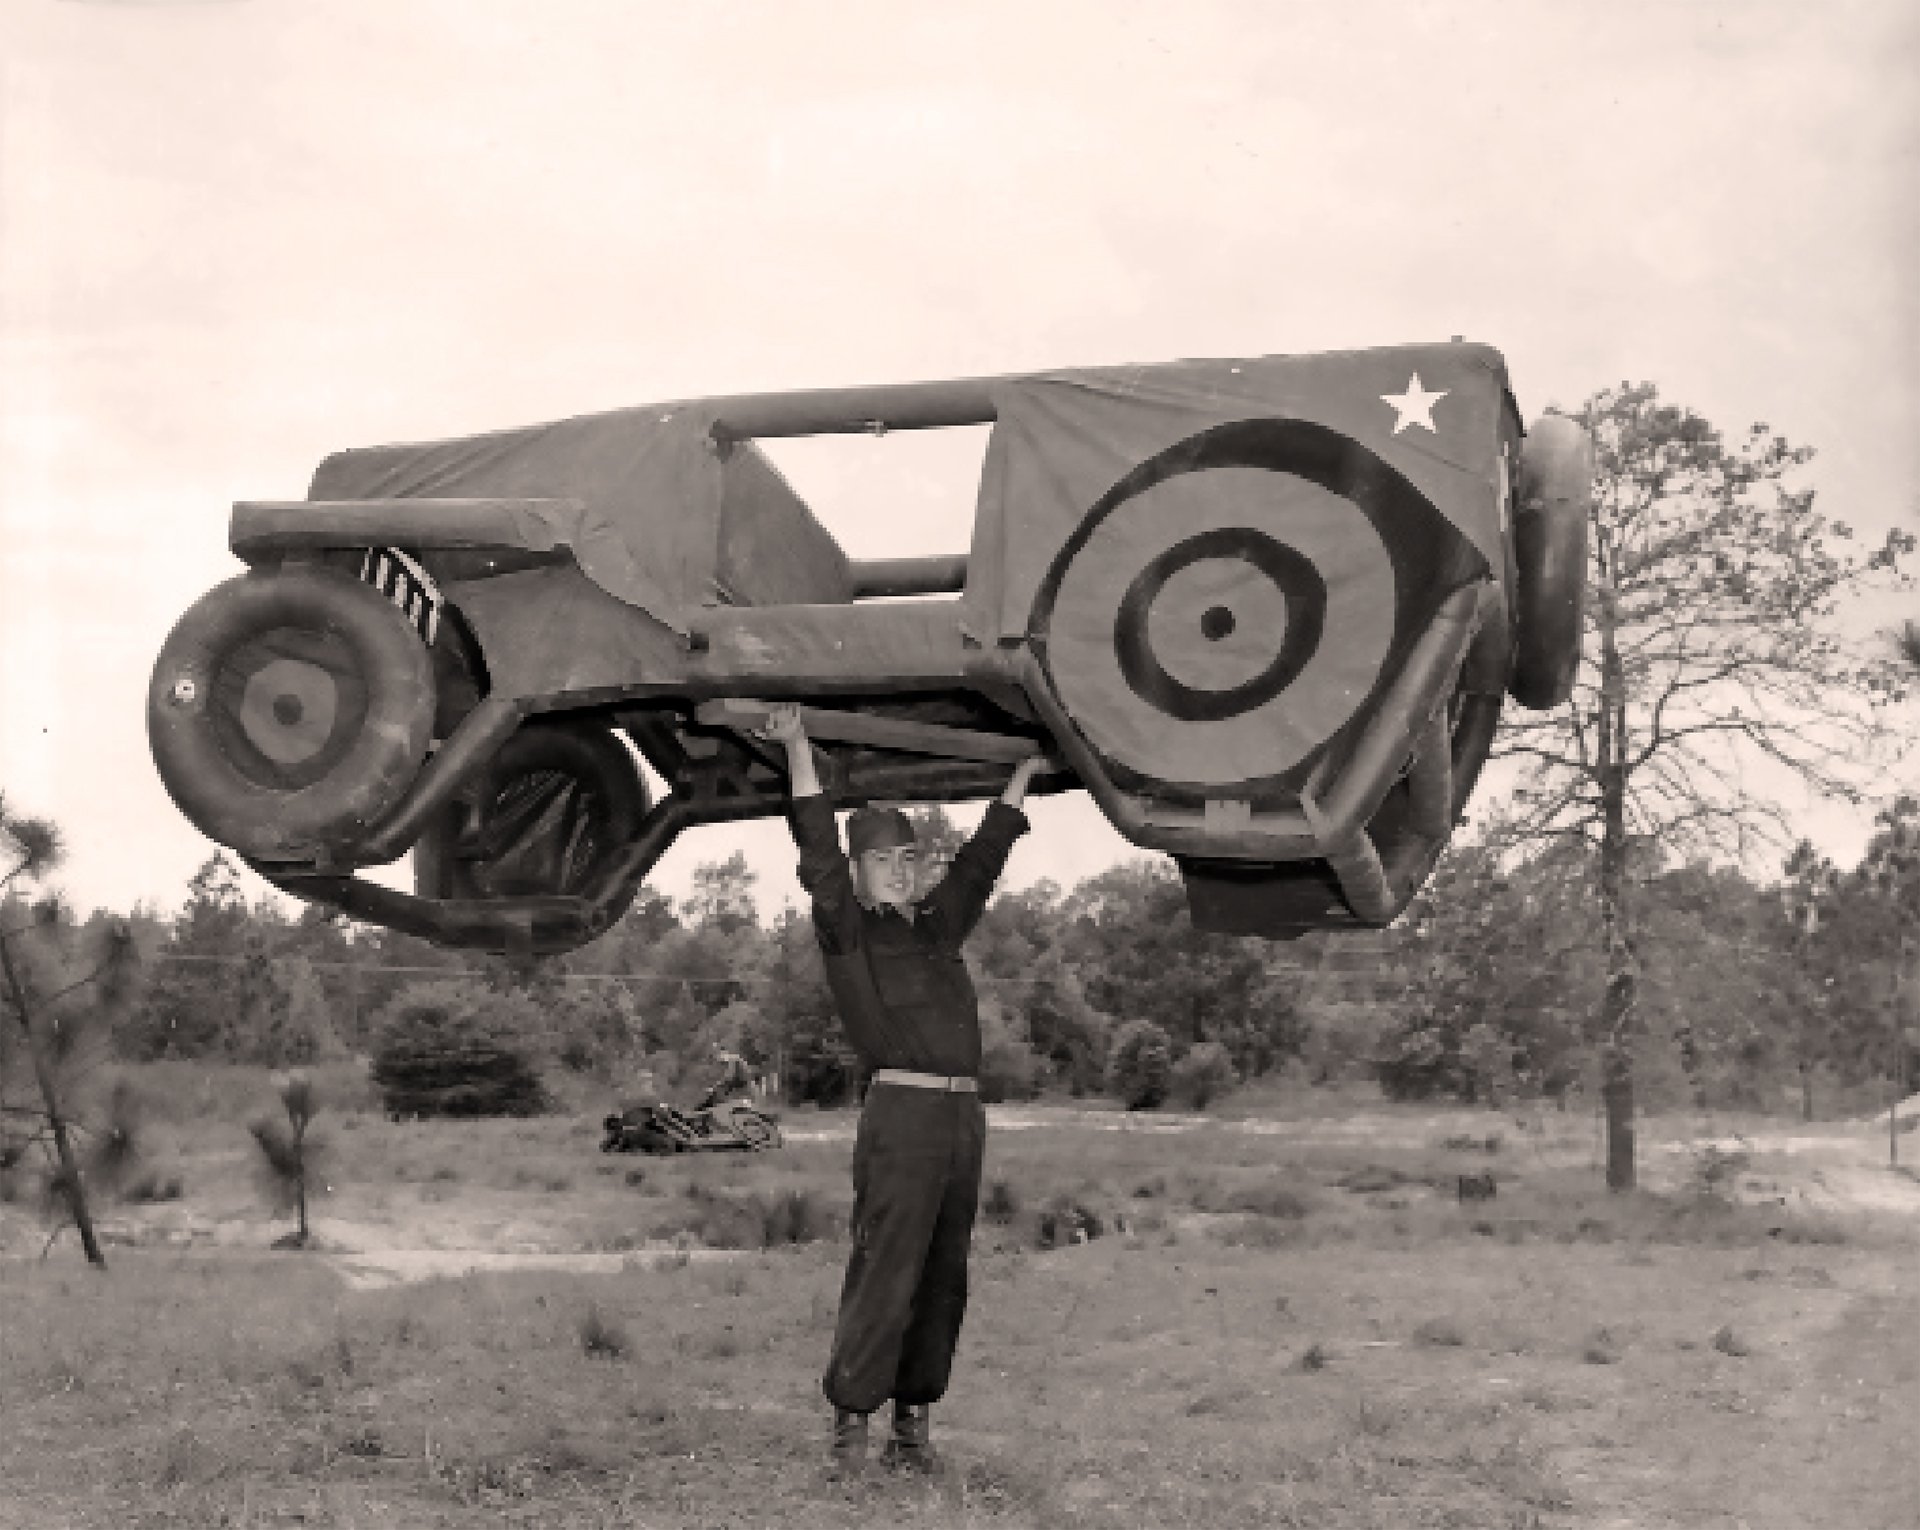 A black and white photo of a man lifting a large model of a military jeep over his head. The man is wearing a dark uniform and is standing in a field with trees in the background.